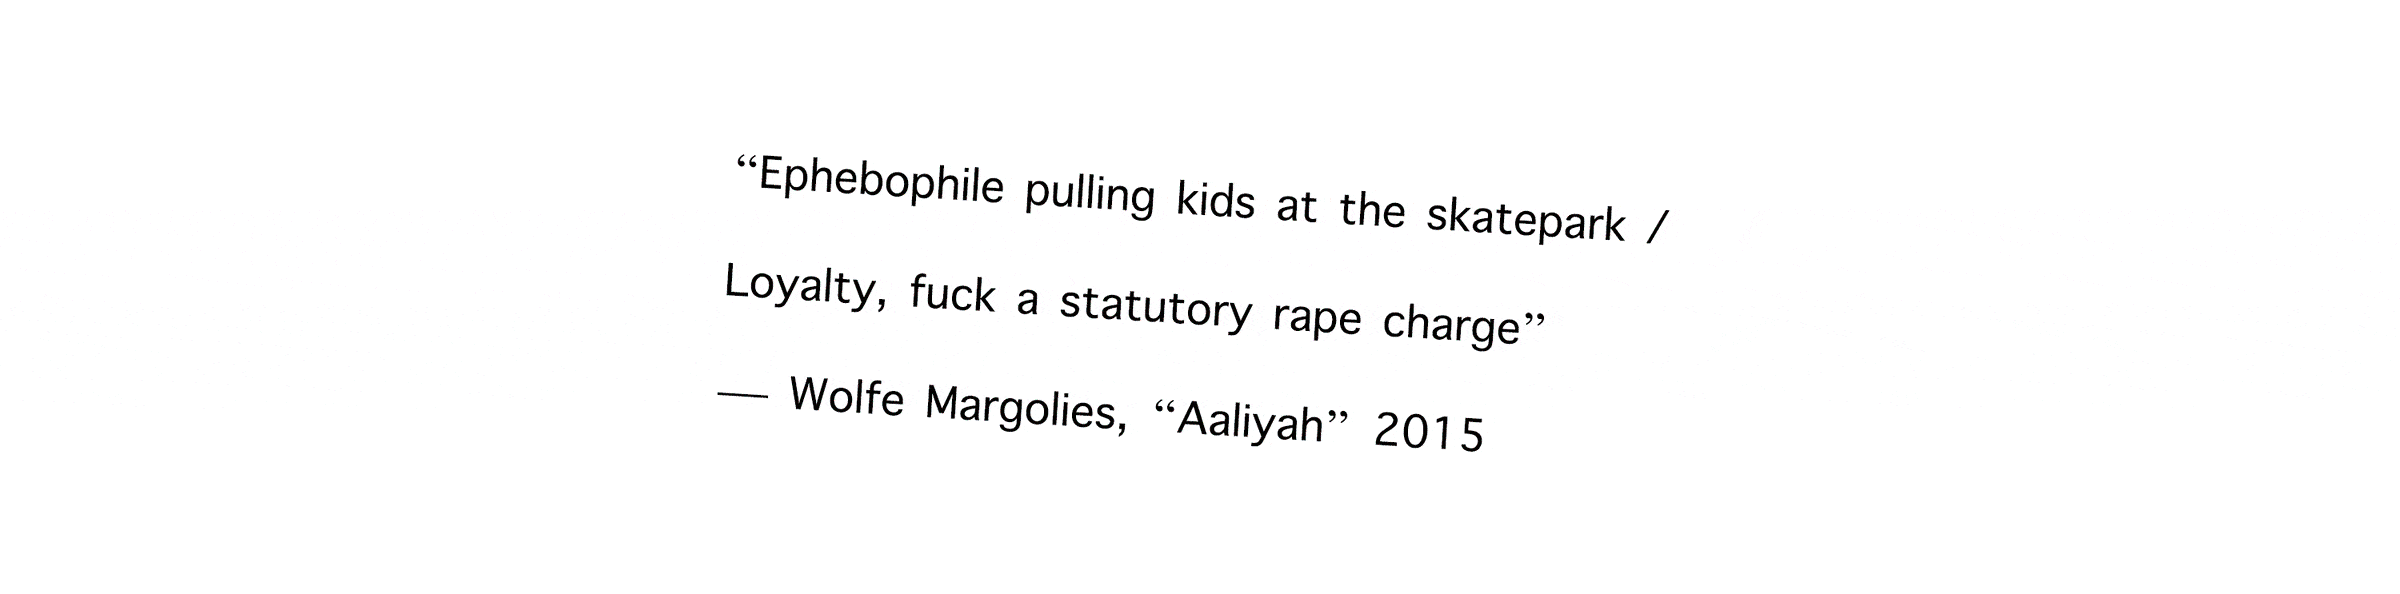 They Believe Wolfe Margolies aka Drrty Pharms Confessed to Rapes in His Rap Lyrics